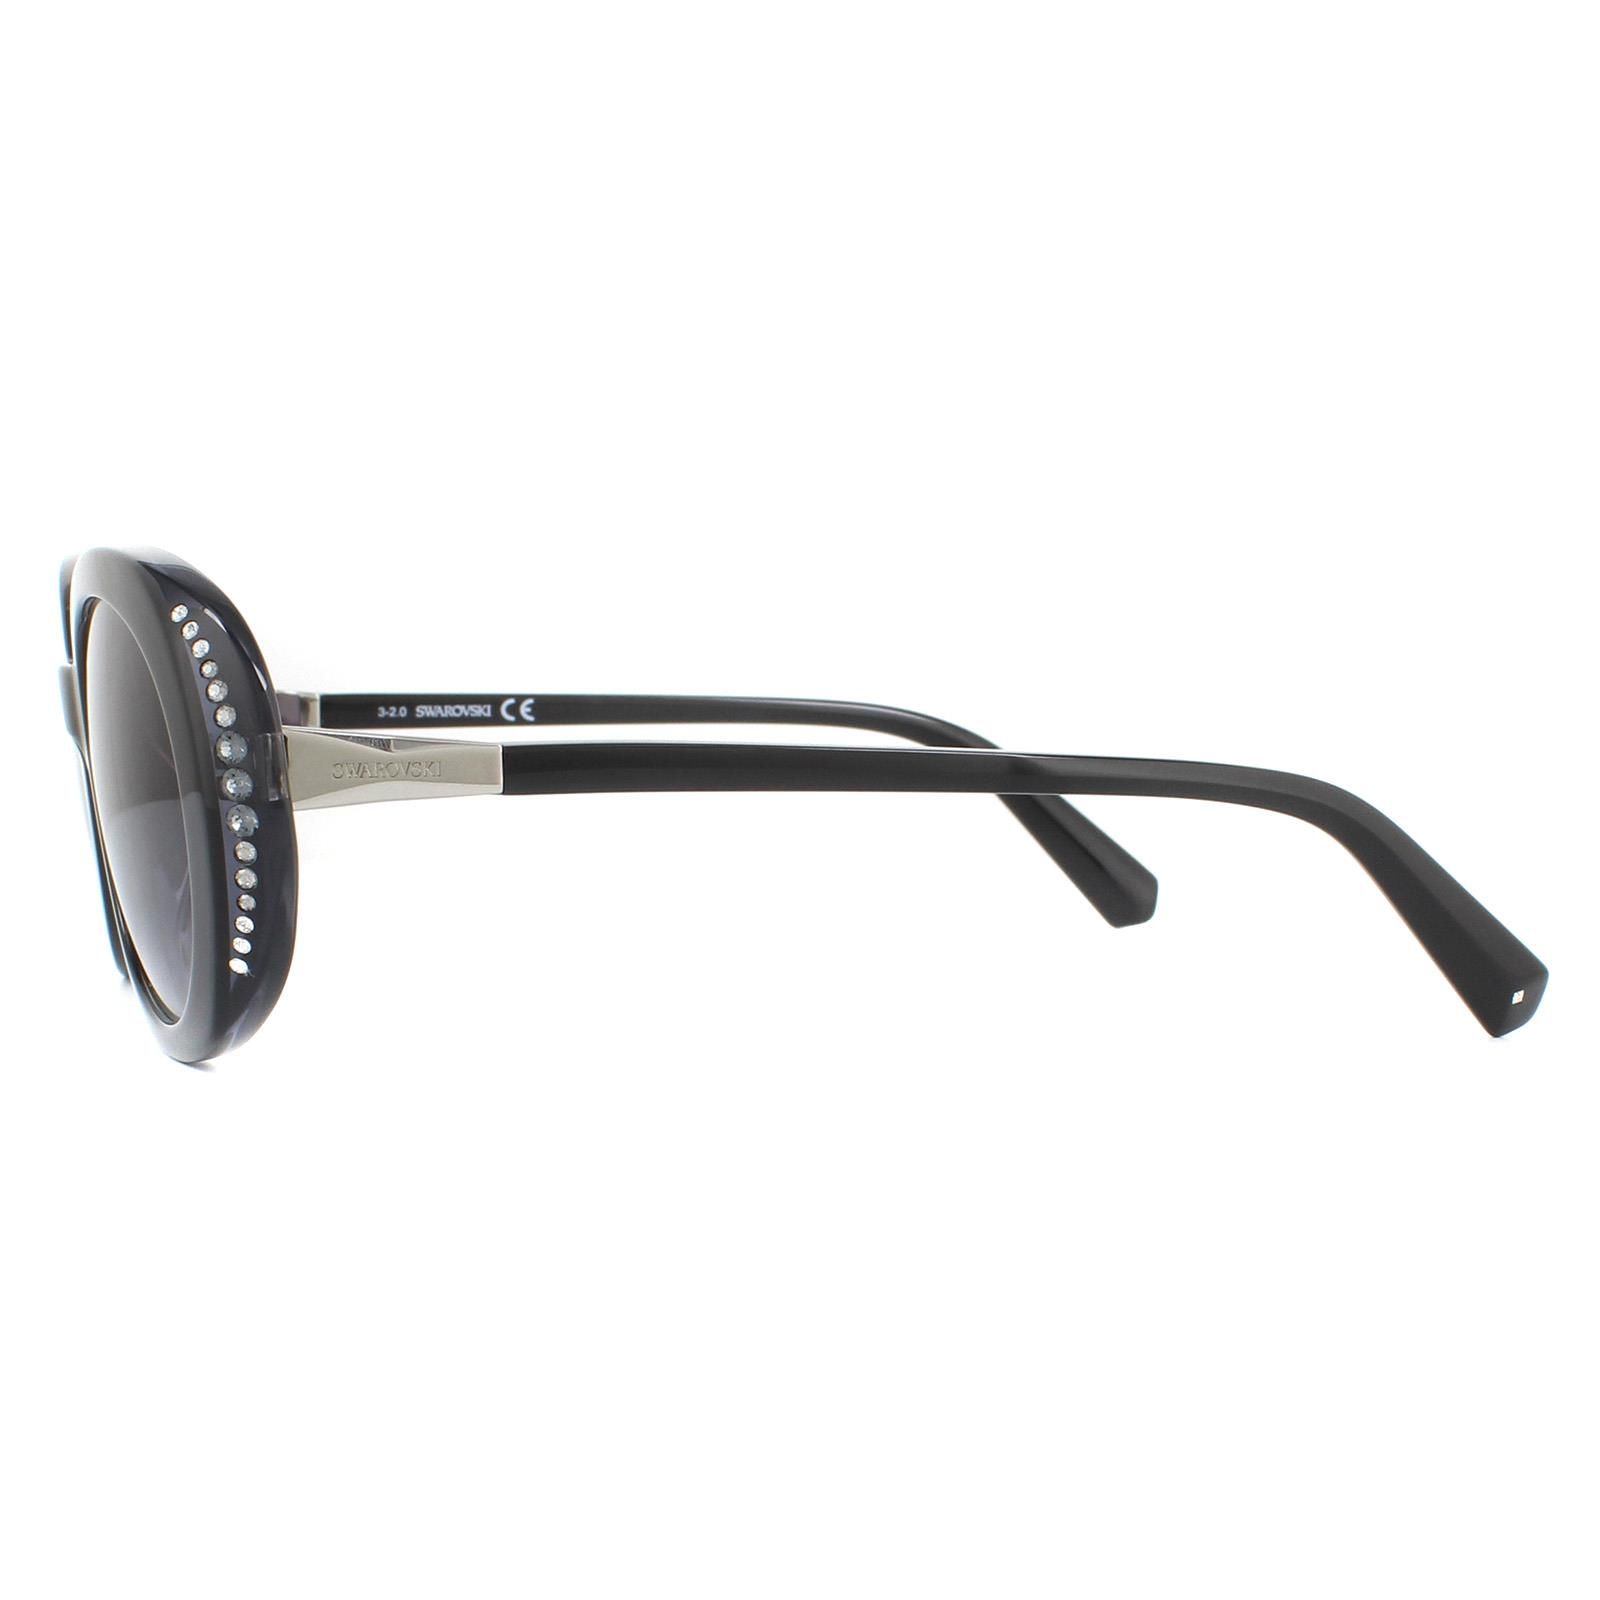 Swarovski Sunglasses SK0281/S 05B Black Grey Gradient are an elegant oval design crafted from lightweight acetate and embellished with Swarovski crystals on the outer edges of the frame with Swarovski logos engraved into the hinges.